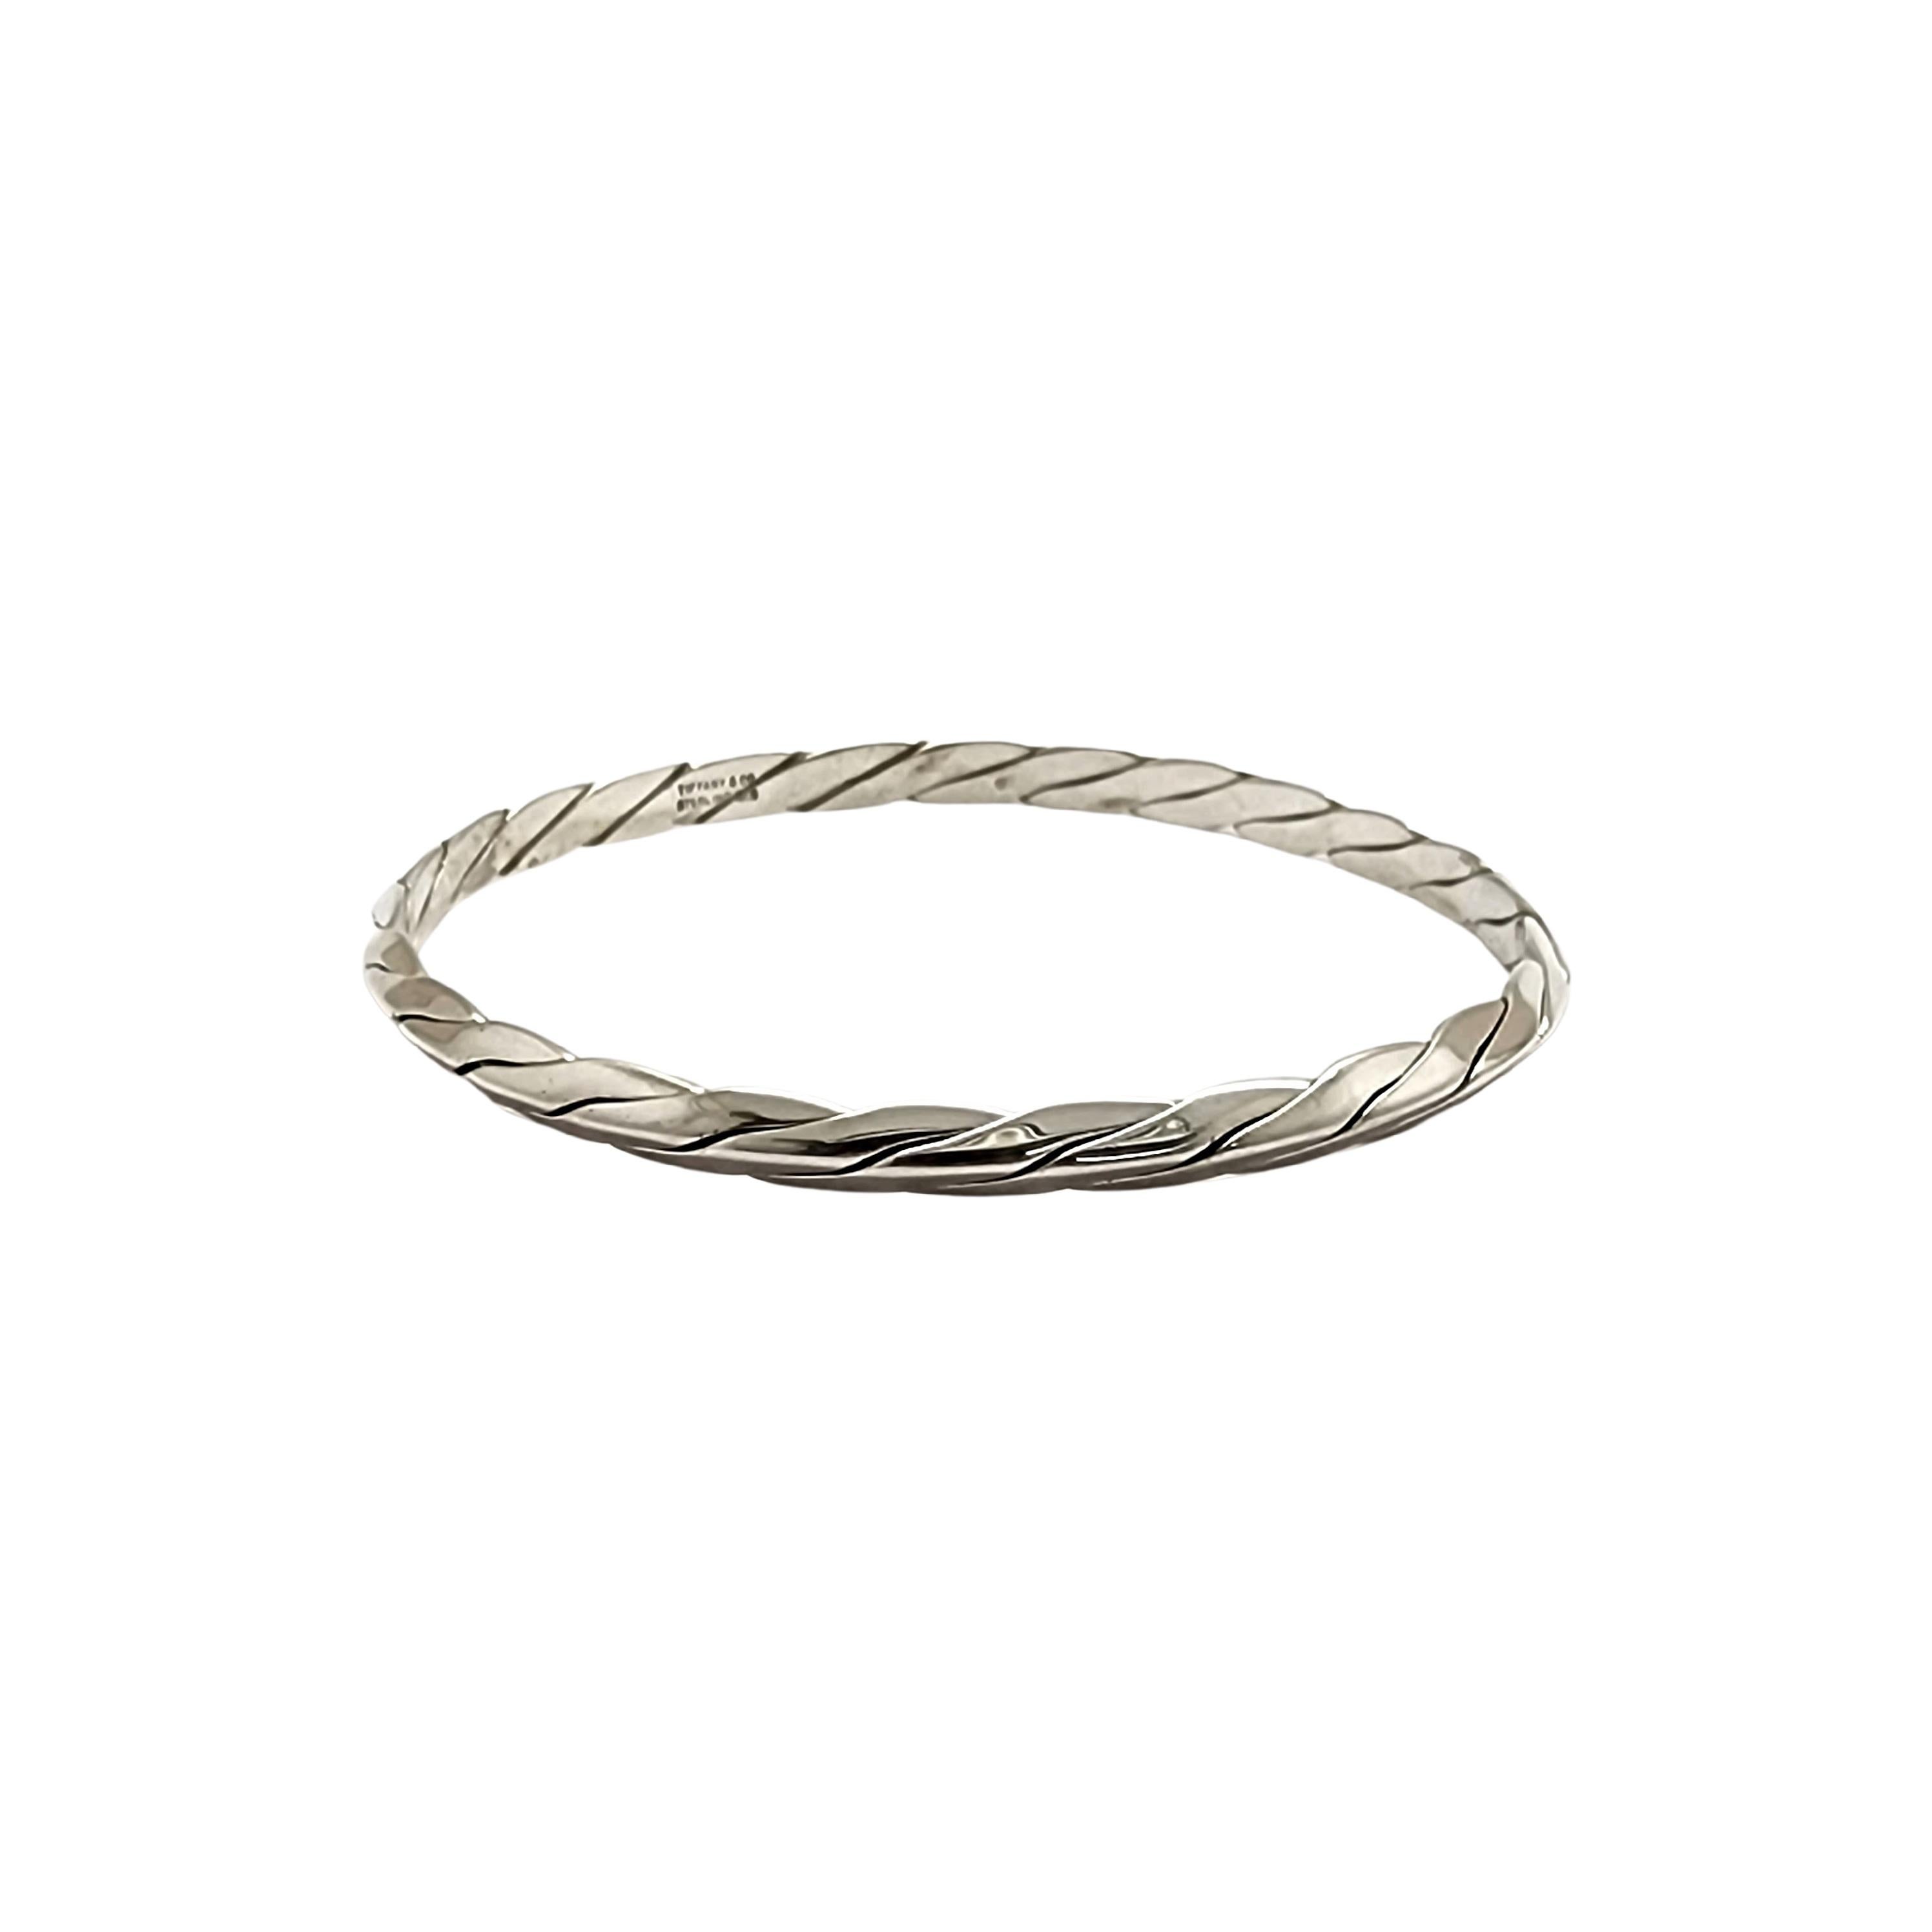 Tiffany & Co sterling silver twisted rope cable bangle bracelet.

An authentic Tiffany & Co bracelet featuring a twisted rope knife edge design. Tiffany box and pouch are not included.

Measures approx 7 3/4